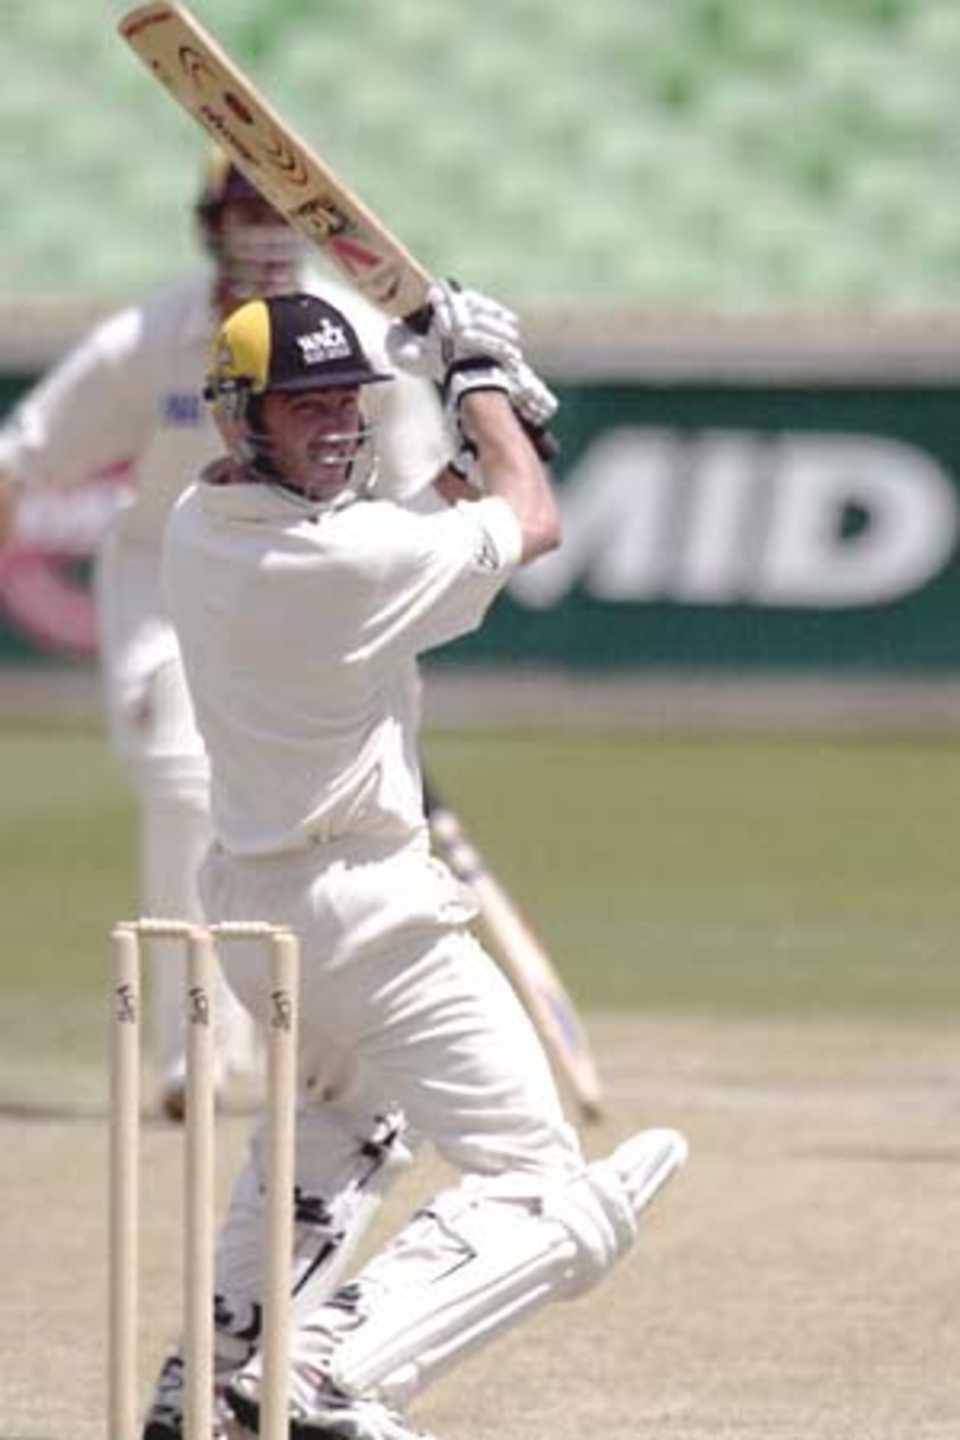 12 Nov 2000: Damien Martyn for Western Australia hits the winning runs in the match between the Western Warriors and the West Indies at the WACA ground in Perth, Australia.